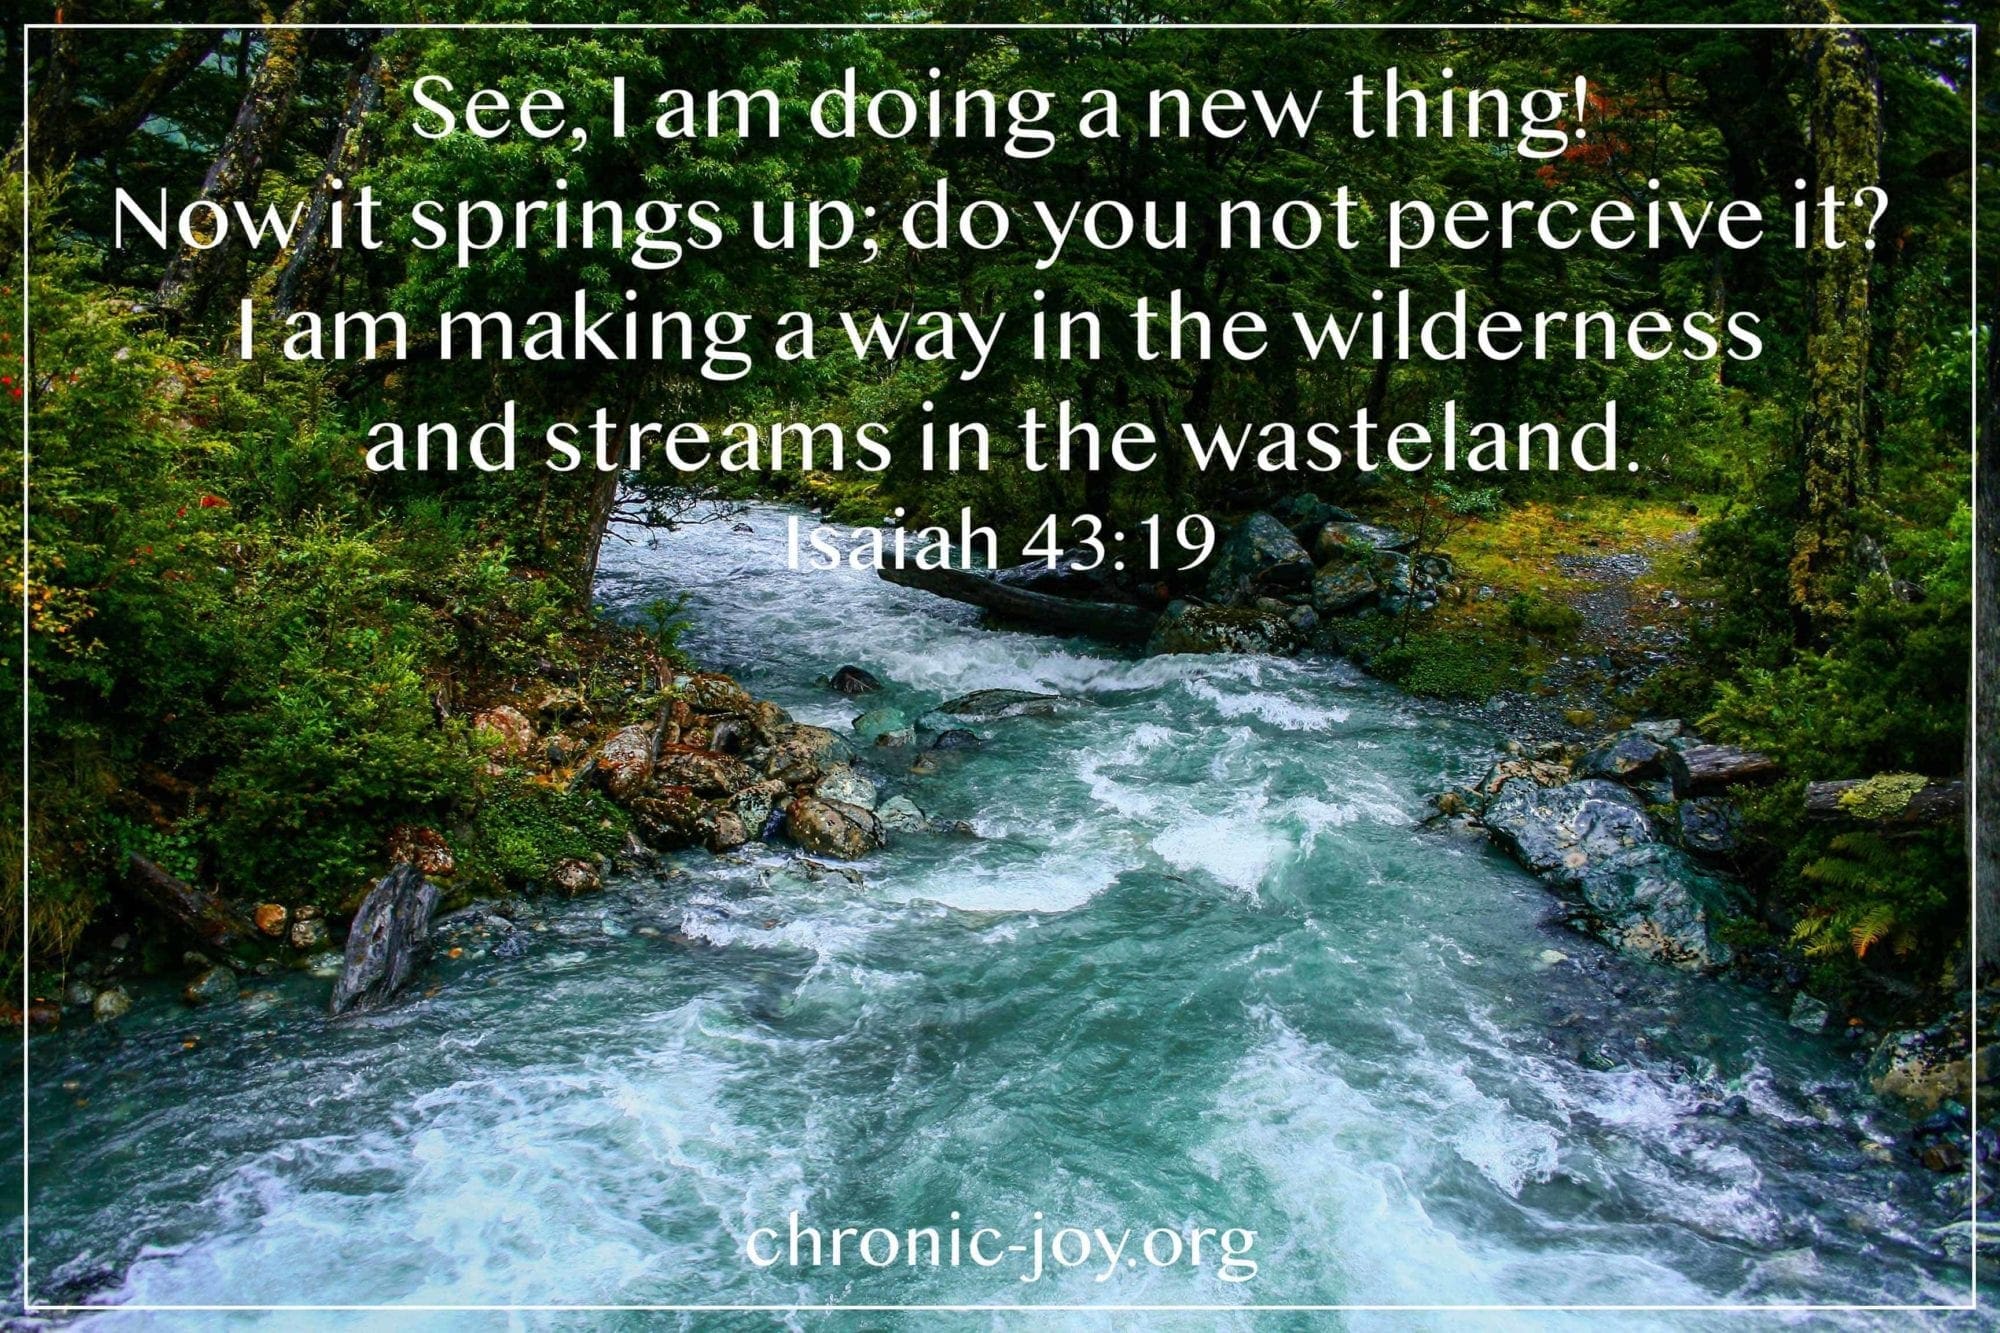 See, I am doing a new thing! Now it springs up, do you not perceive it? I am making a way in the wilderness and streams in the wasteland. (Isaiah 43:19)